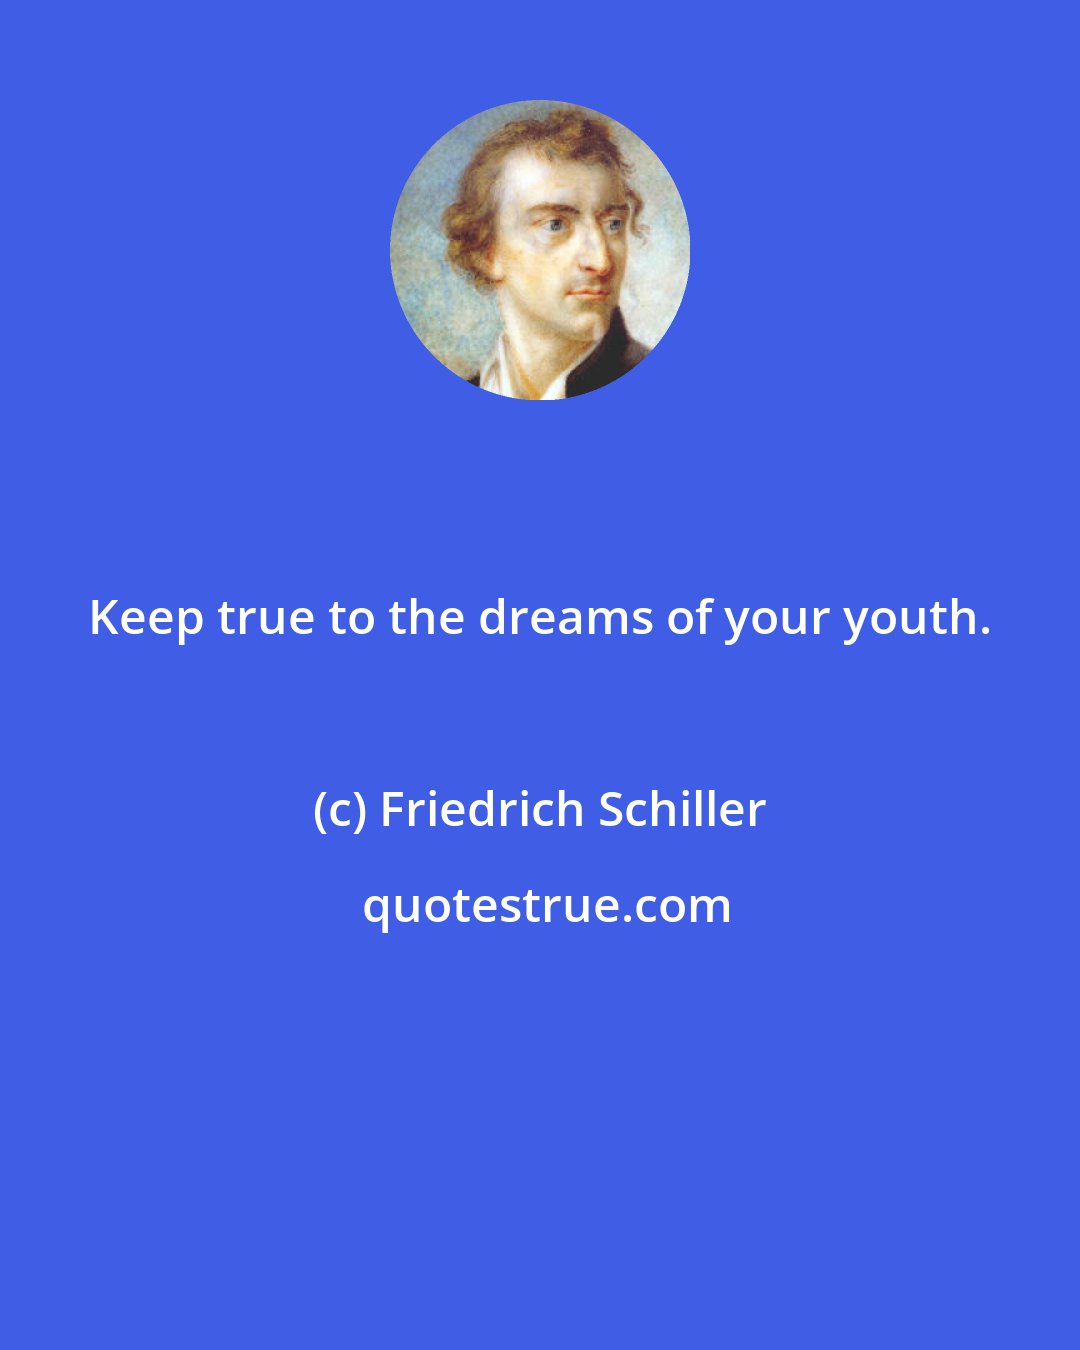 Friedrich Schiller: Keep true to the dreams of your youth.